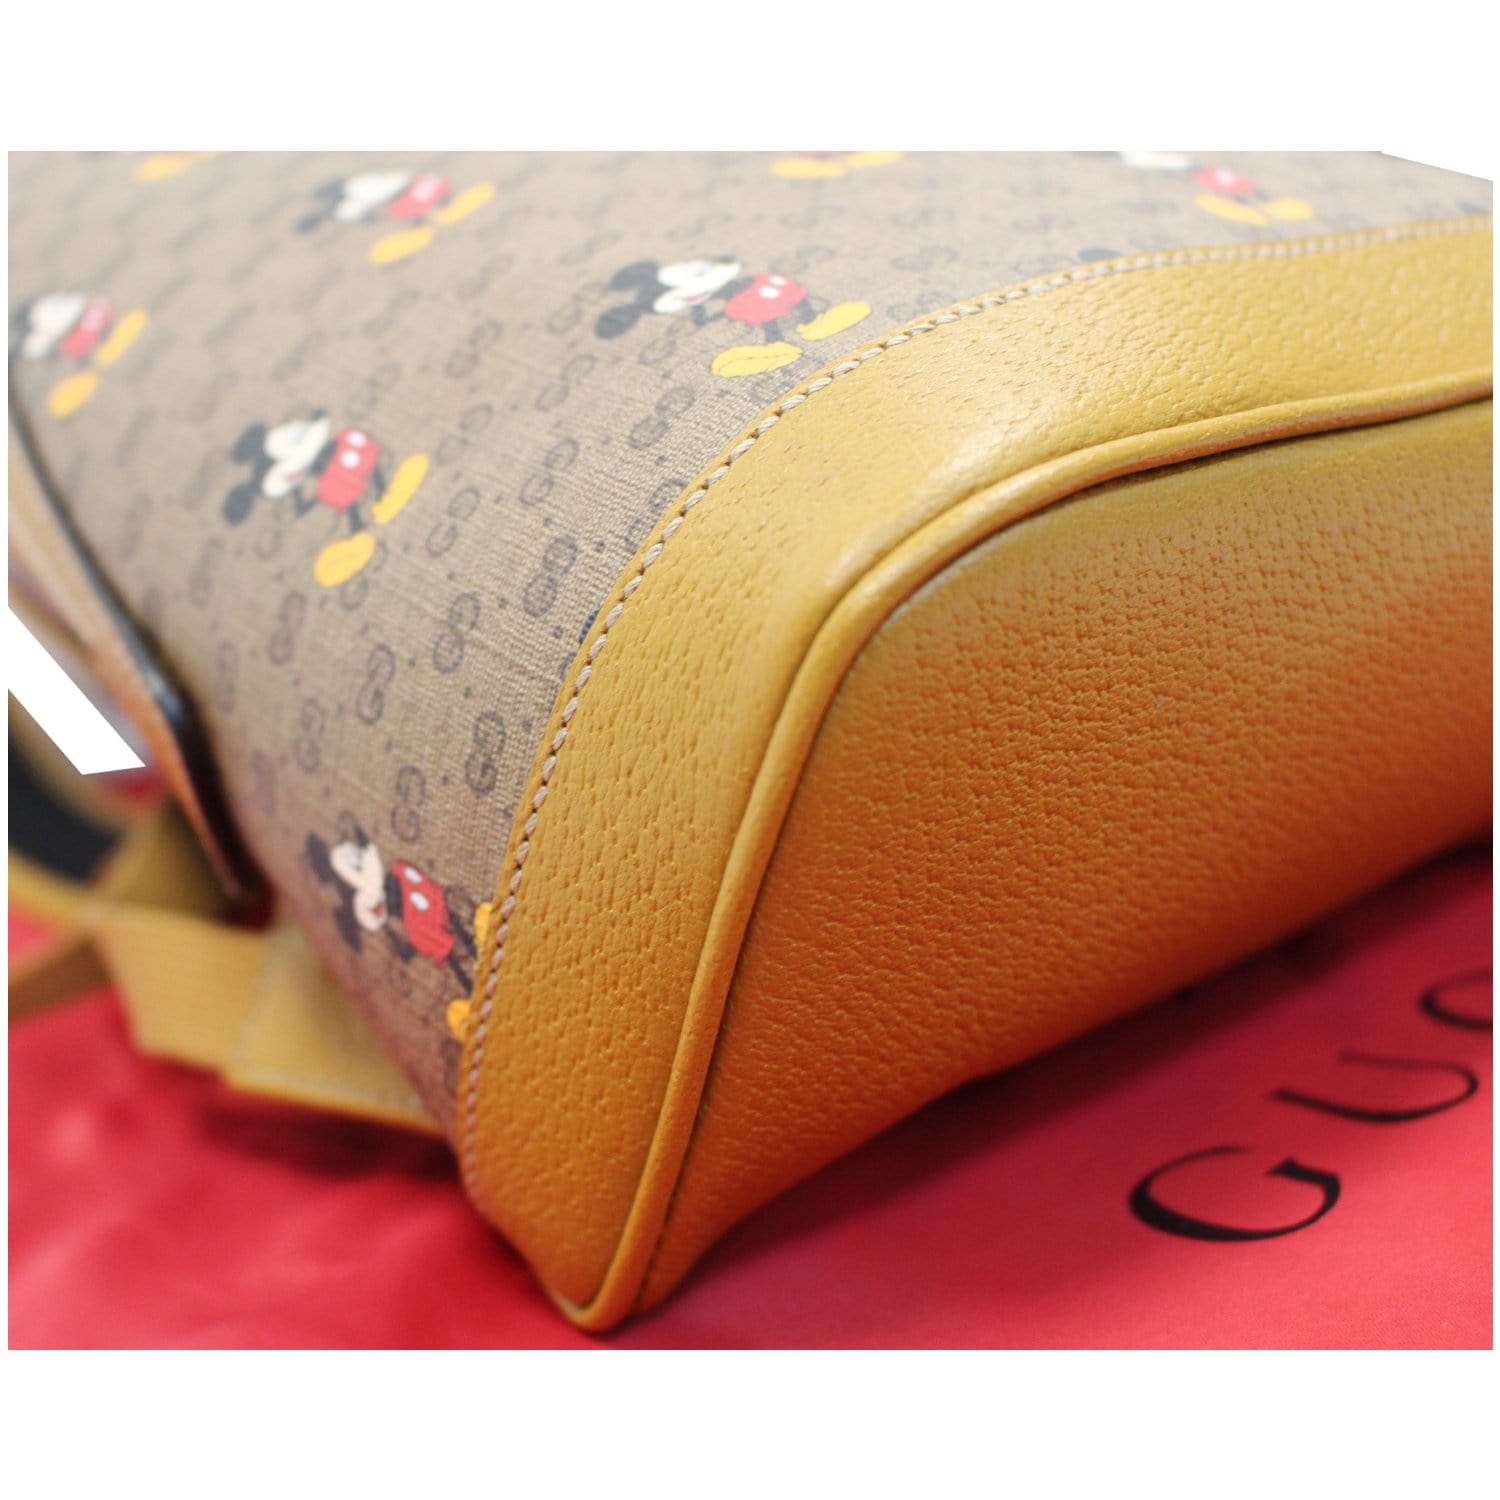 Gucci Mickey Mouse Tote Bags for Women